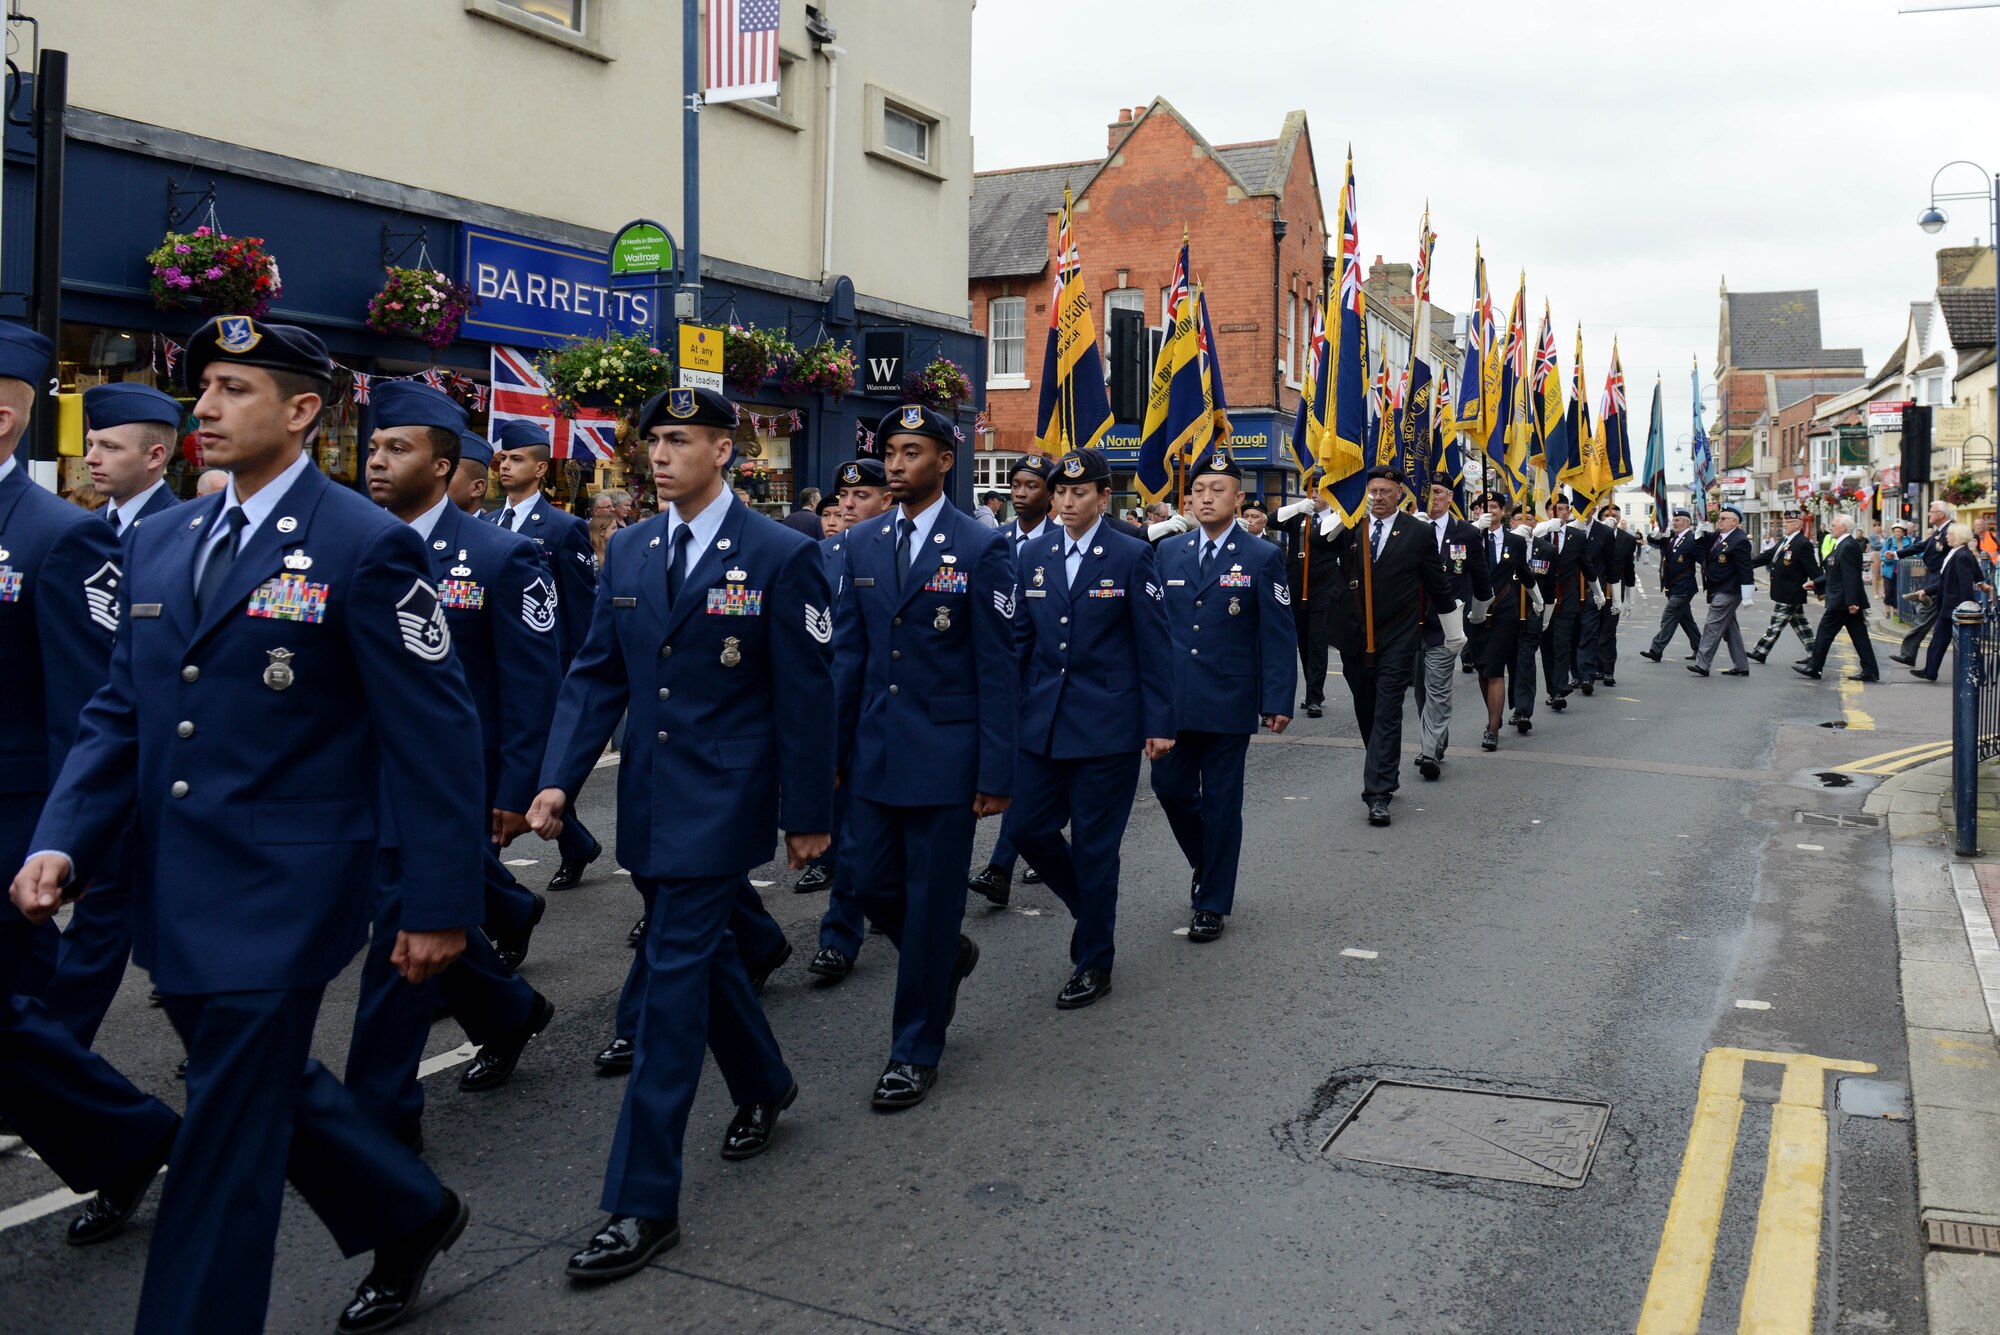 Airmen from the 423rd Air Base Group march through the streets of St. Neots, United Kingdom, during the Freedom of the Town and Armed Forces Day celebration, July 5, 2014. The festival honored past and present Service members from the United States and United Kingdom. (U.S. Air Force photo by Tech. Sgt. Chrissy Best/Released)